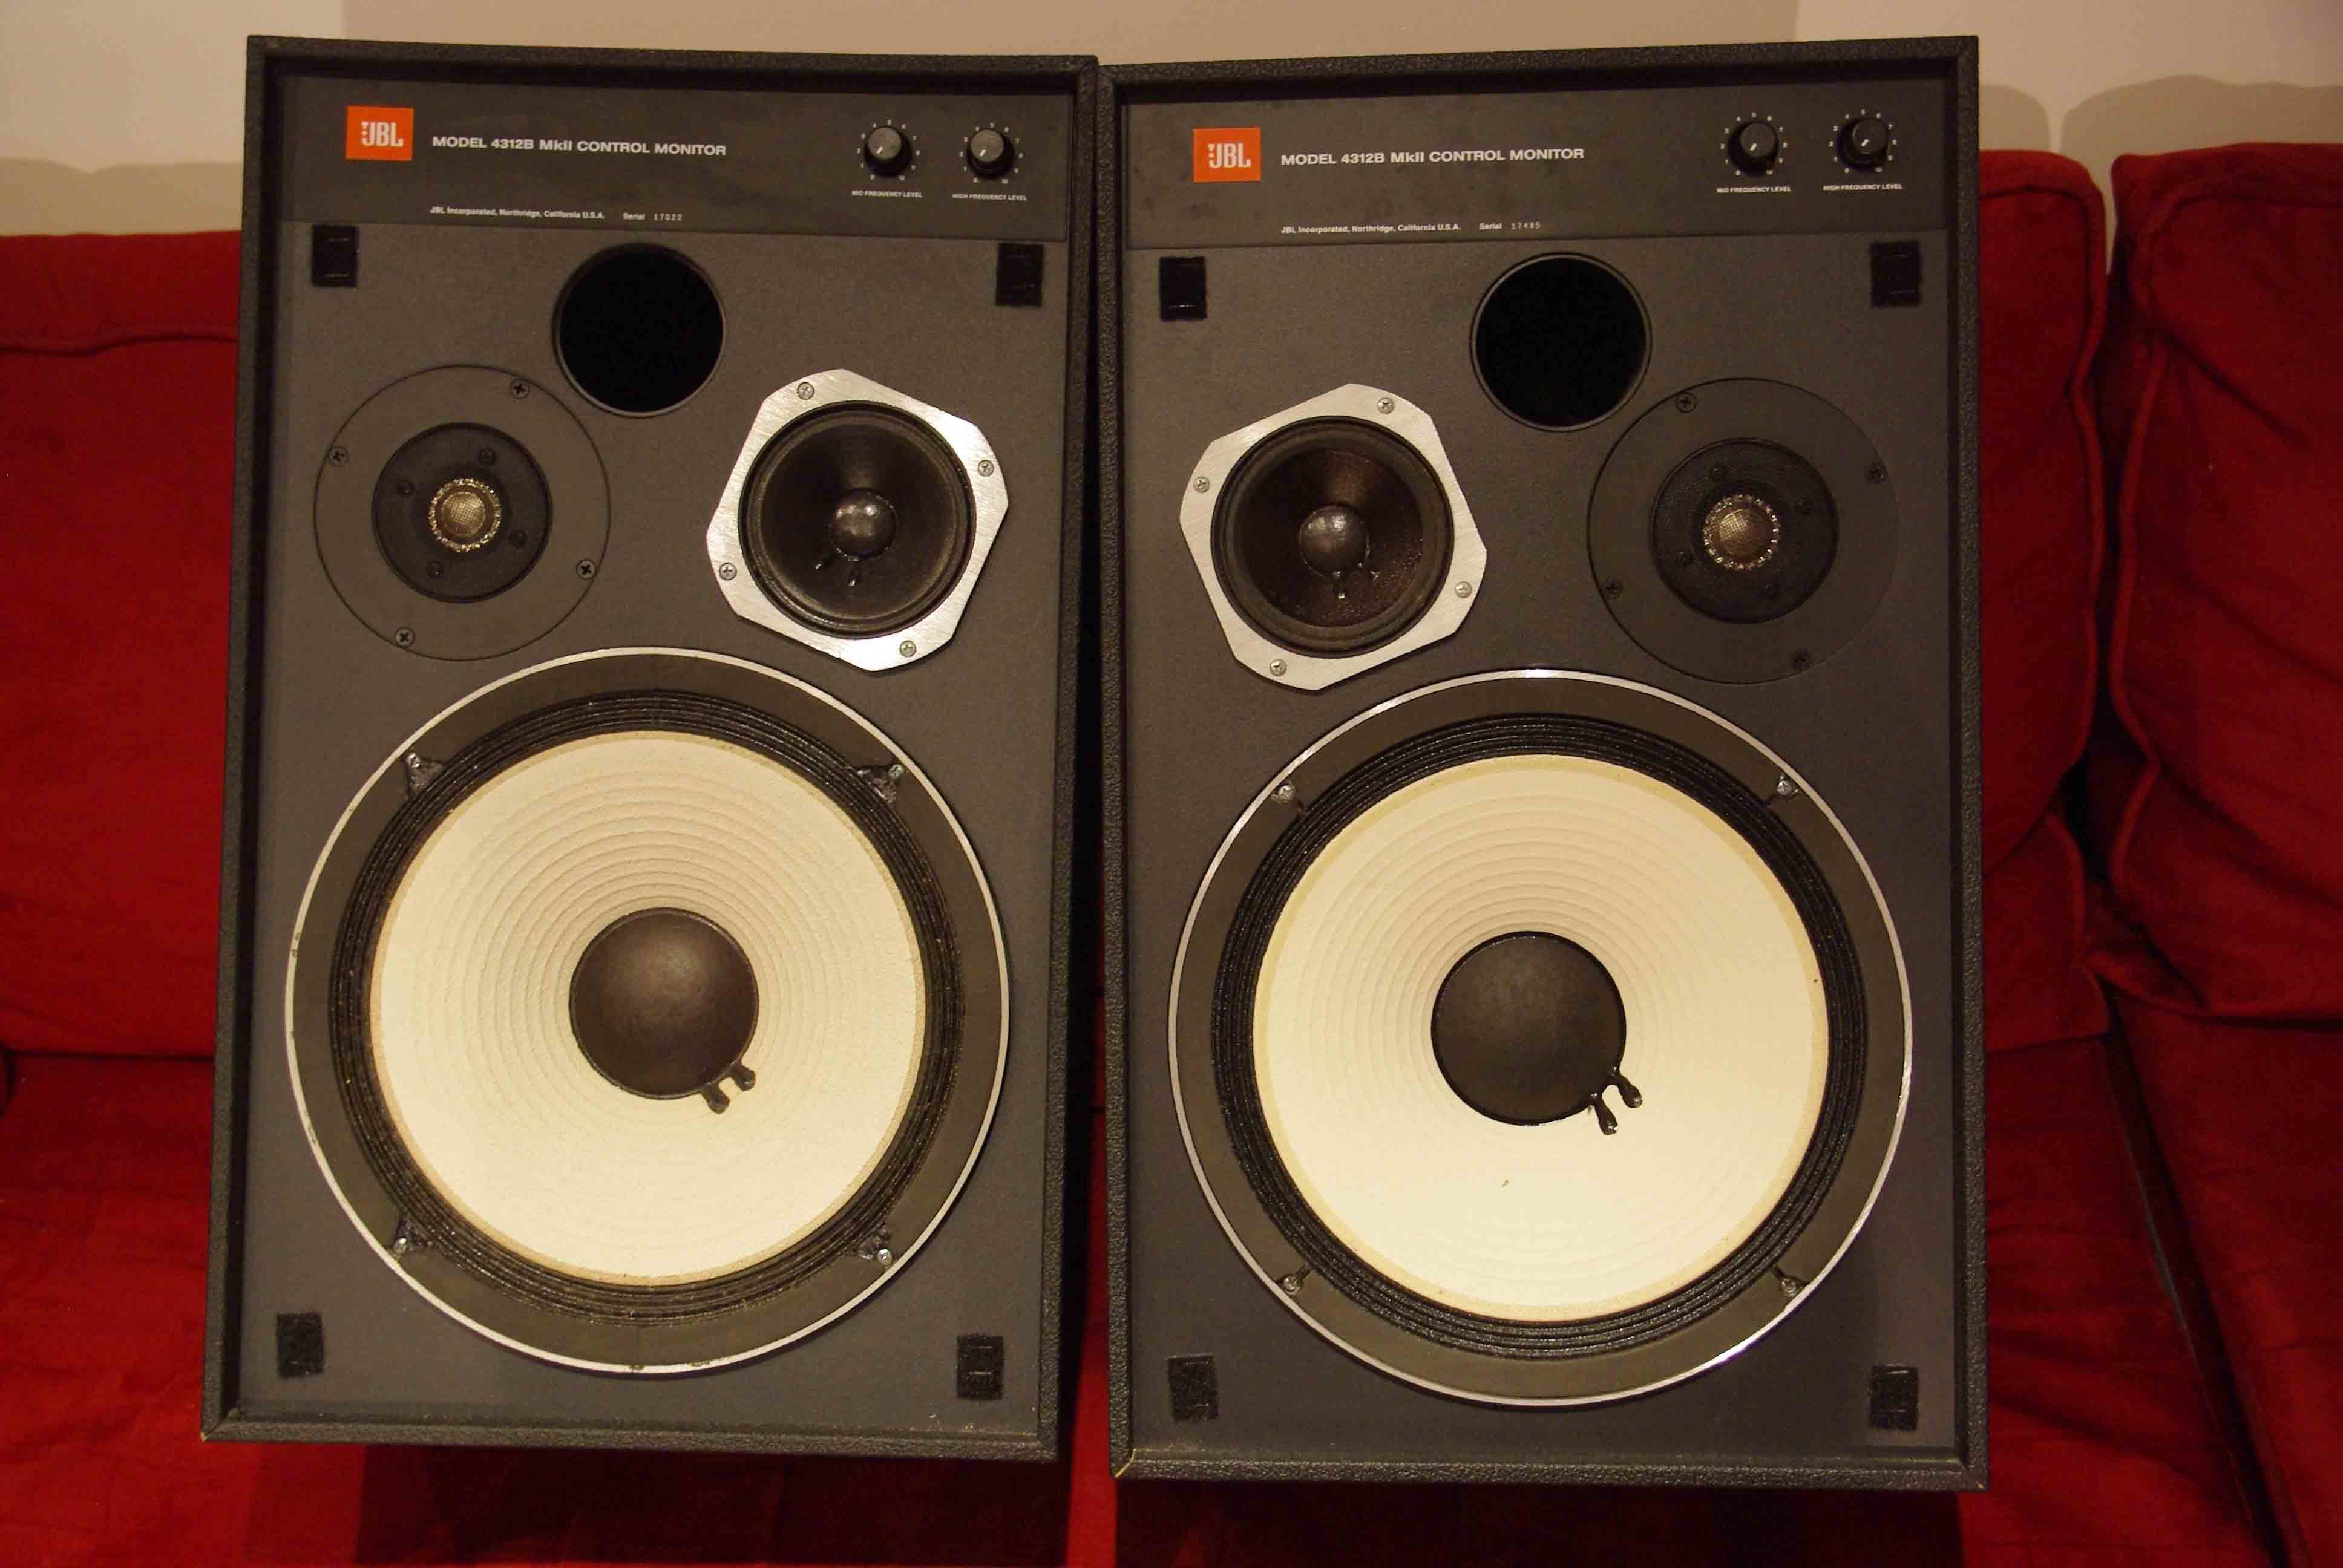 The JBL 4312 review